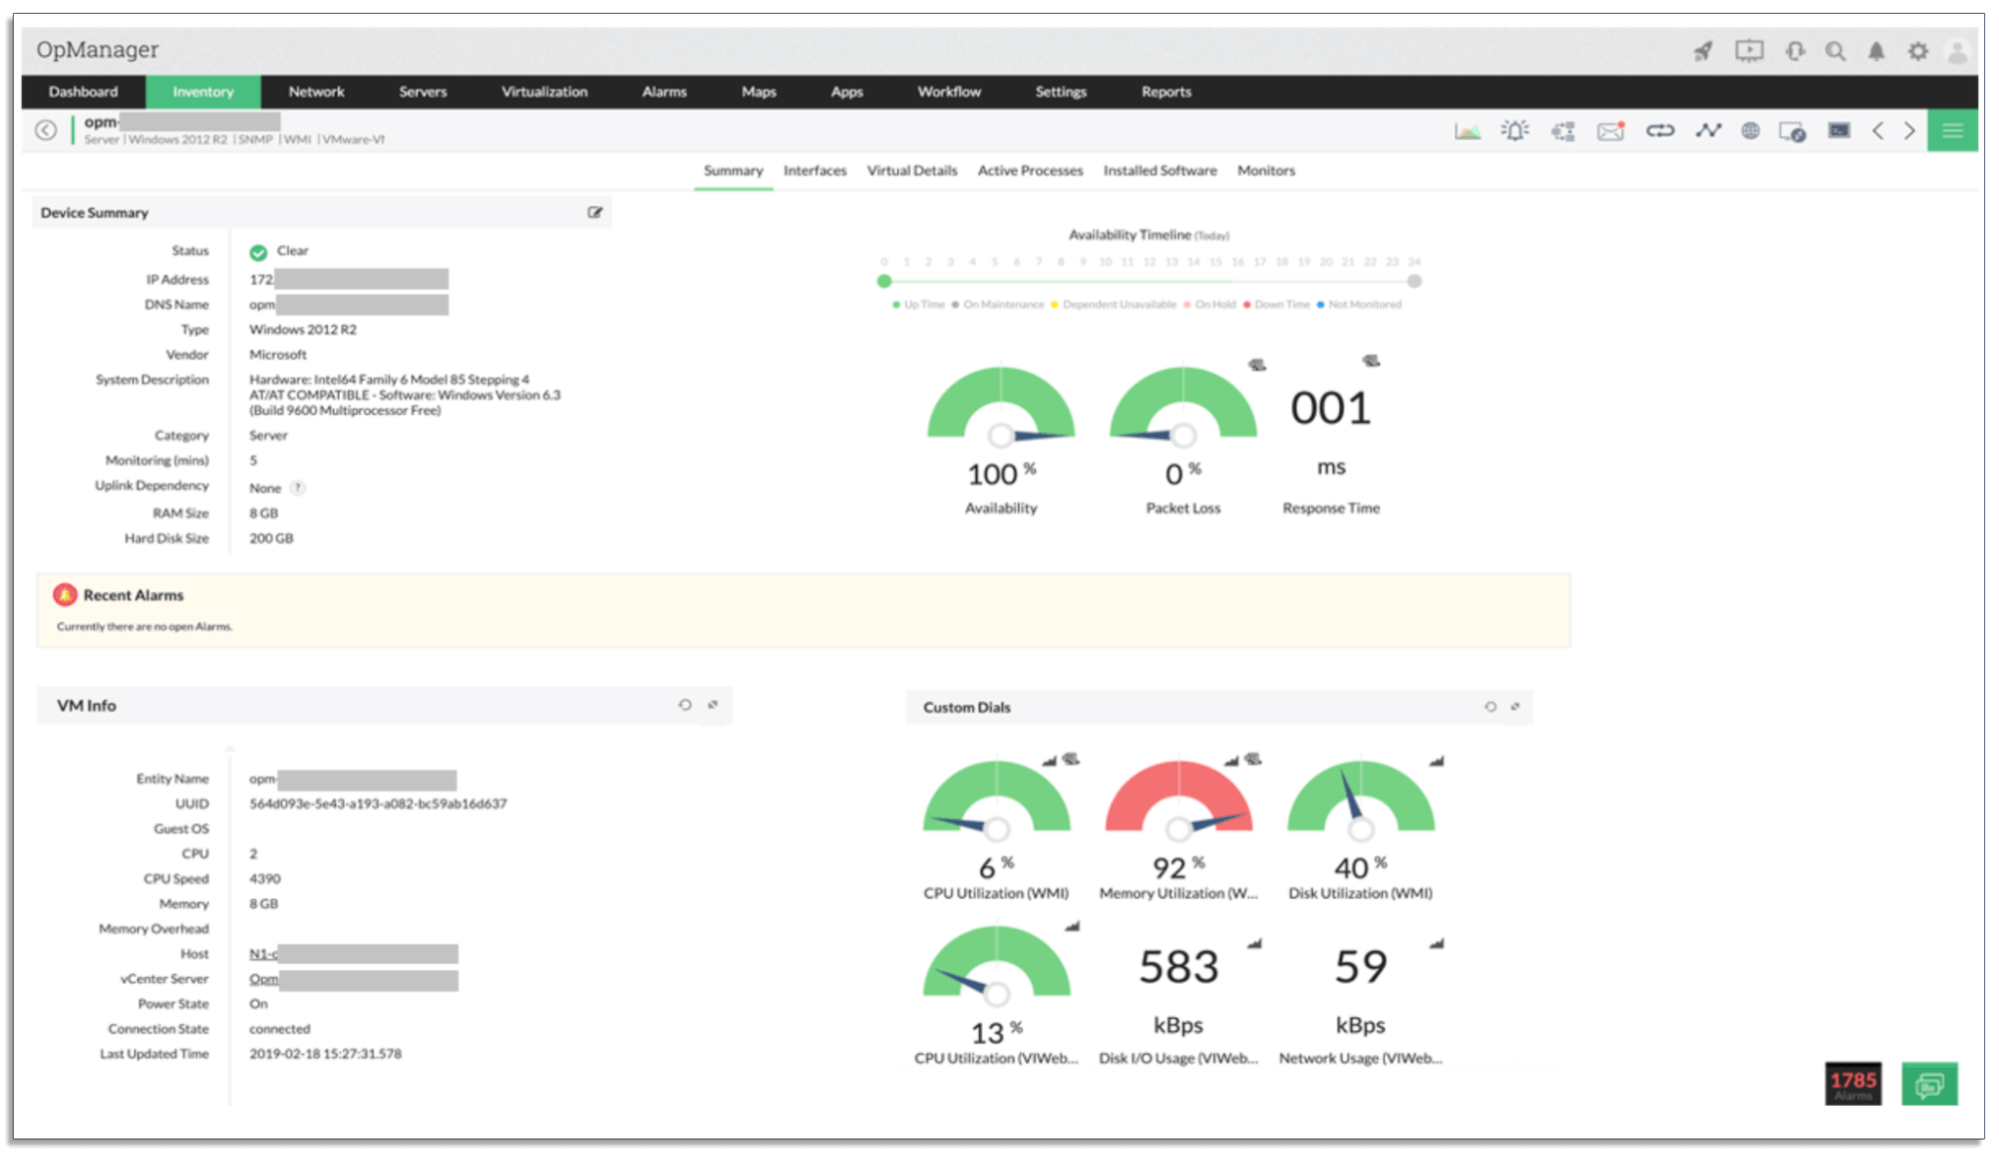 ManageEngine OpManager dashboard